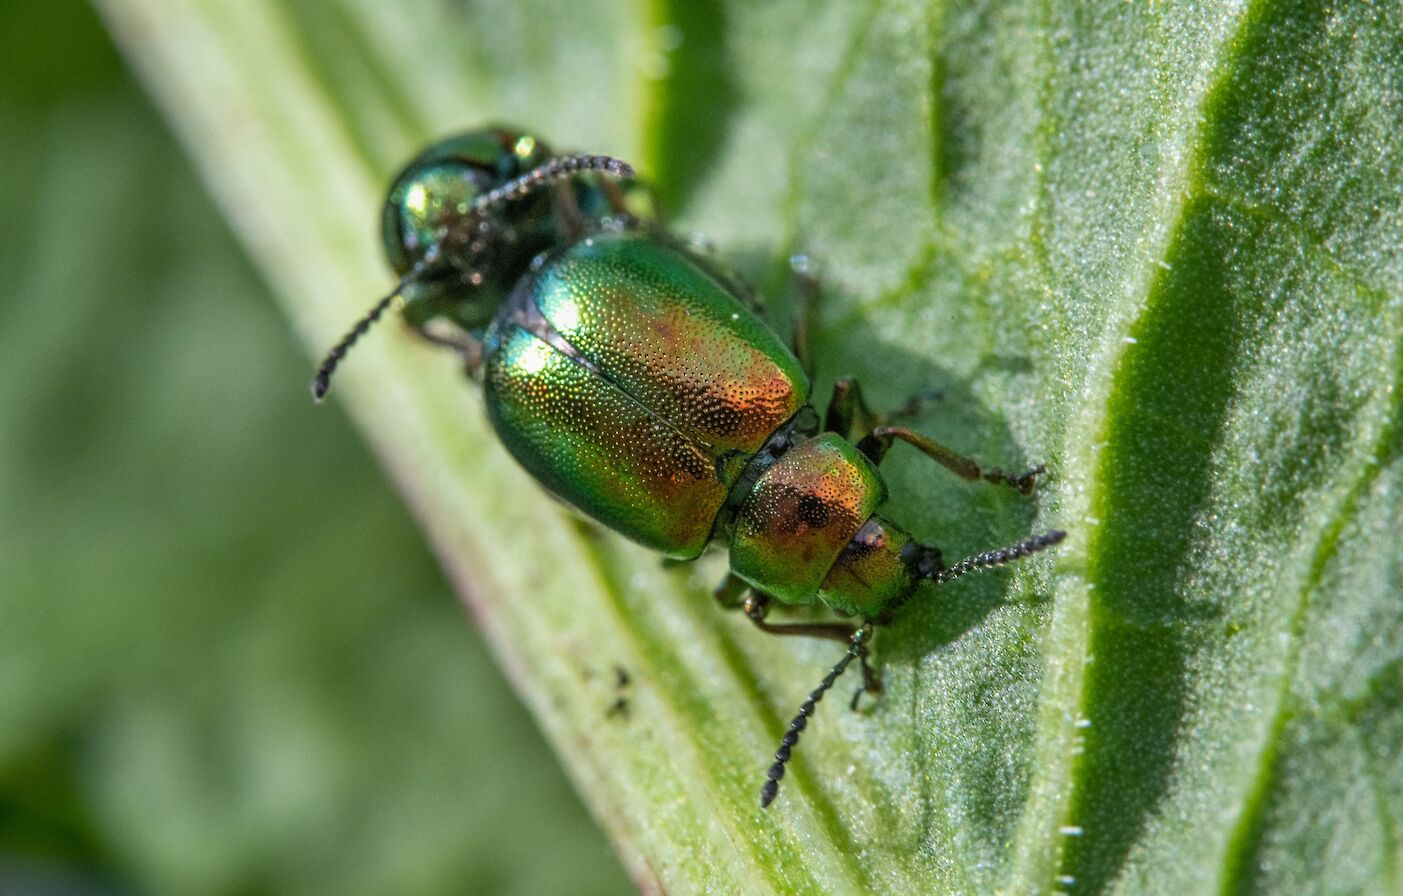 Green beetles in Orkney - image by Raymond Besant